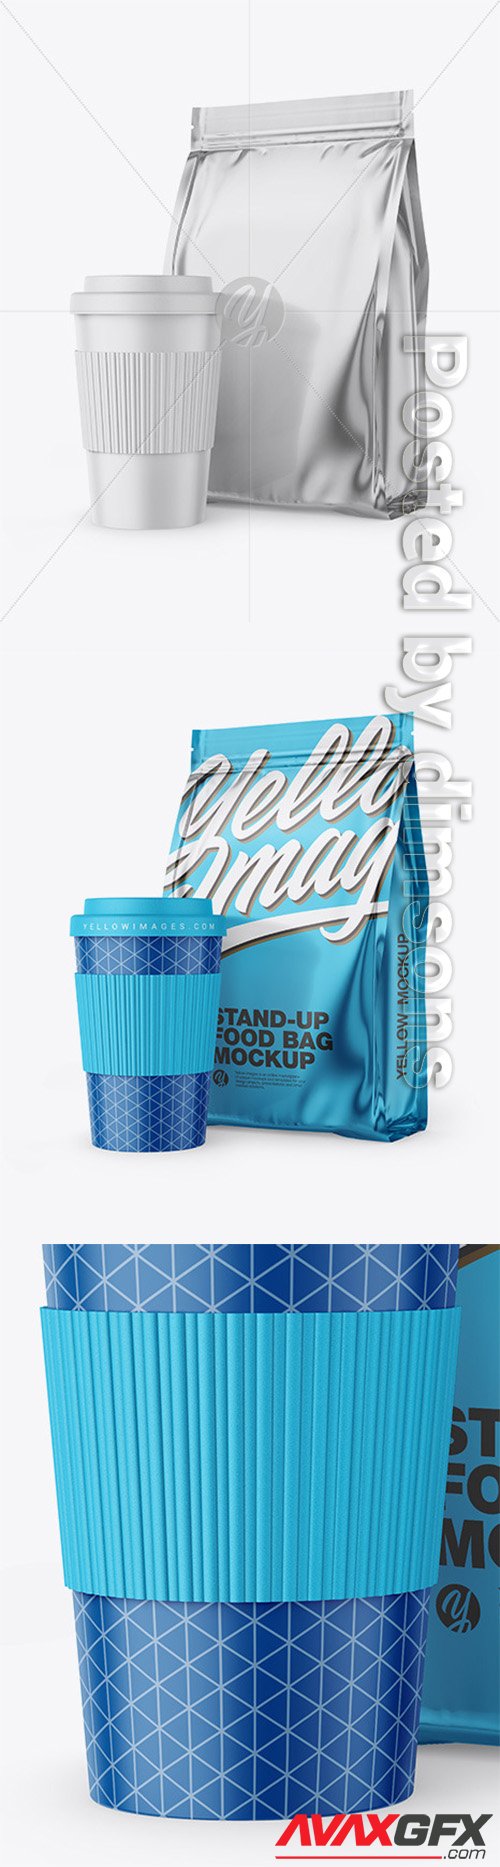 Metallic Stand-Up Bag with Coffee Cup Mockup 65091